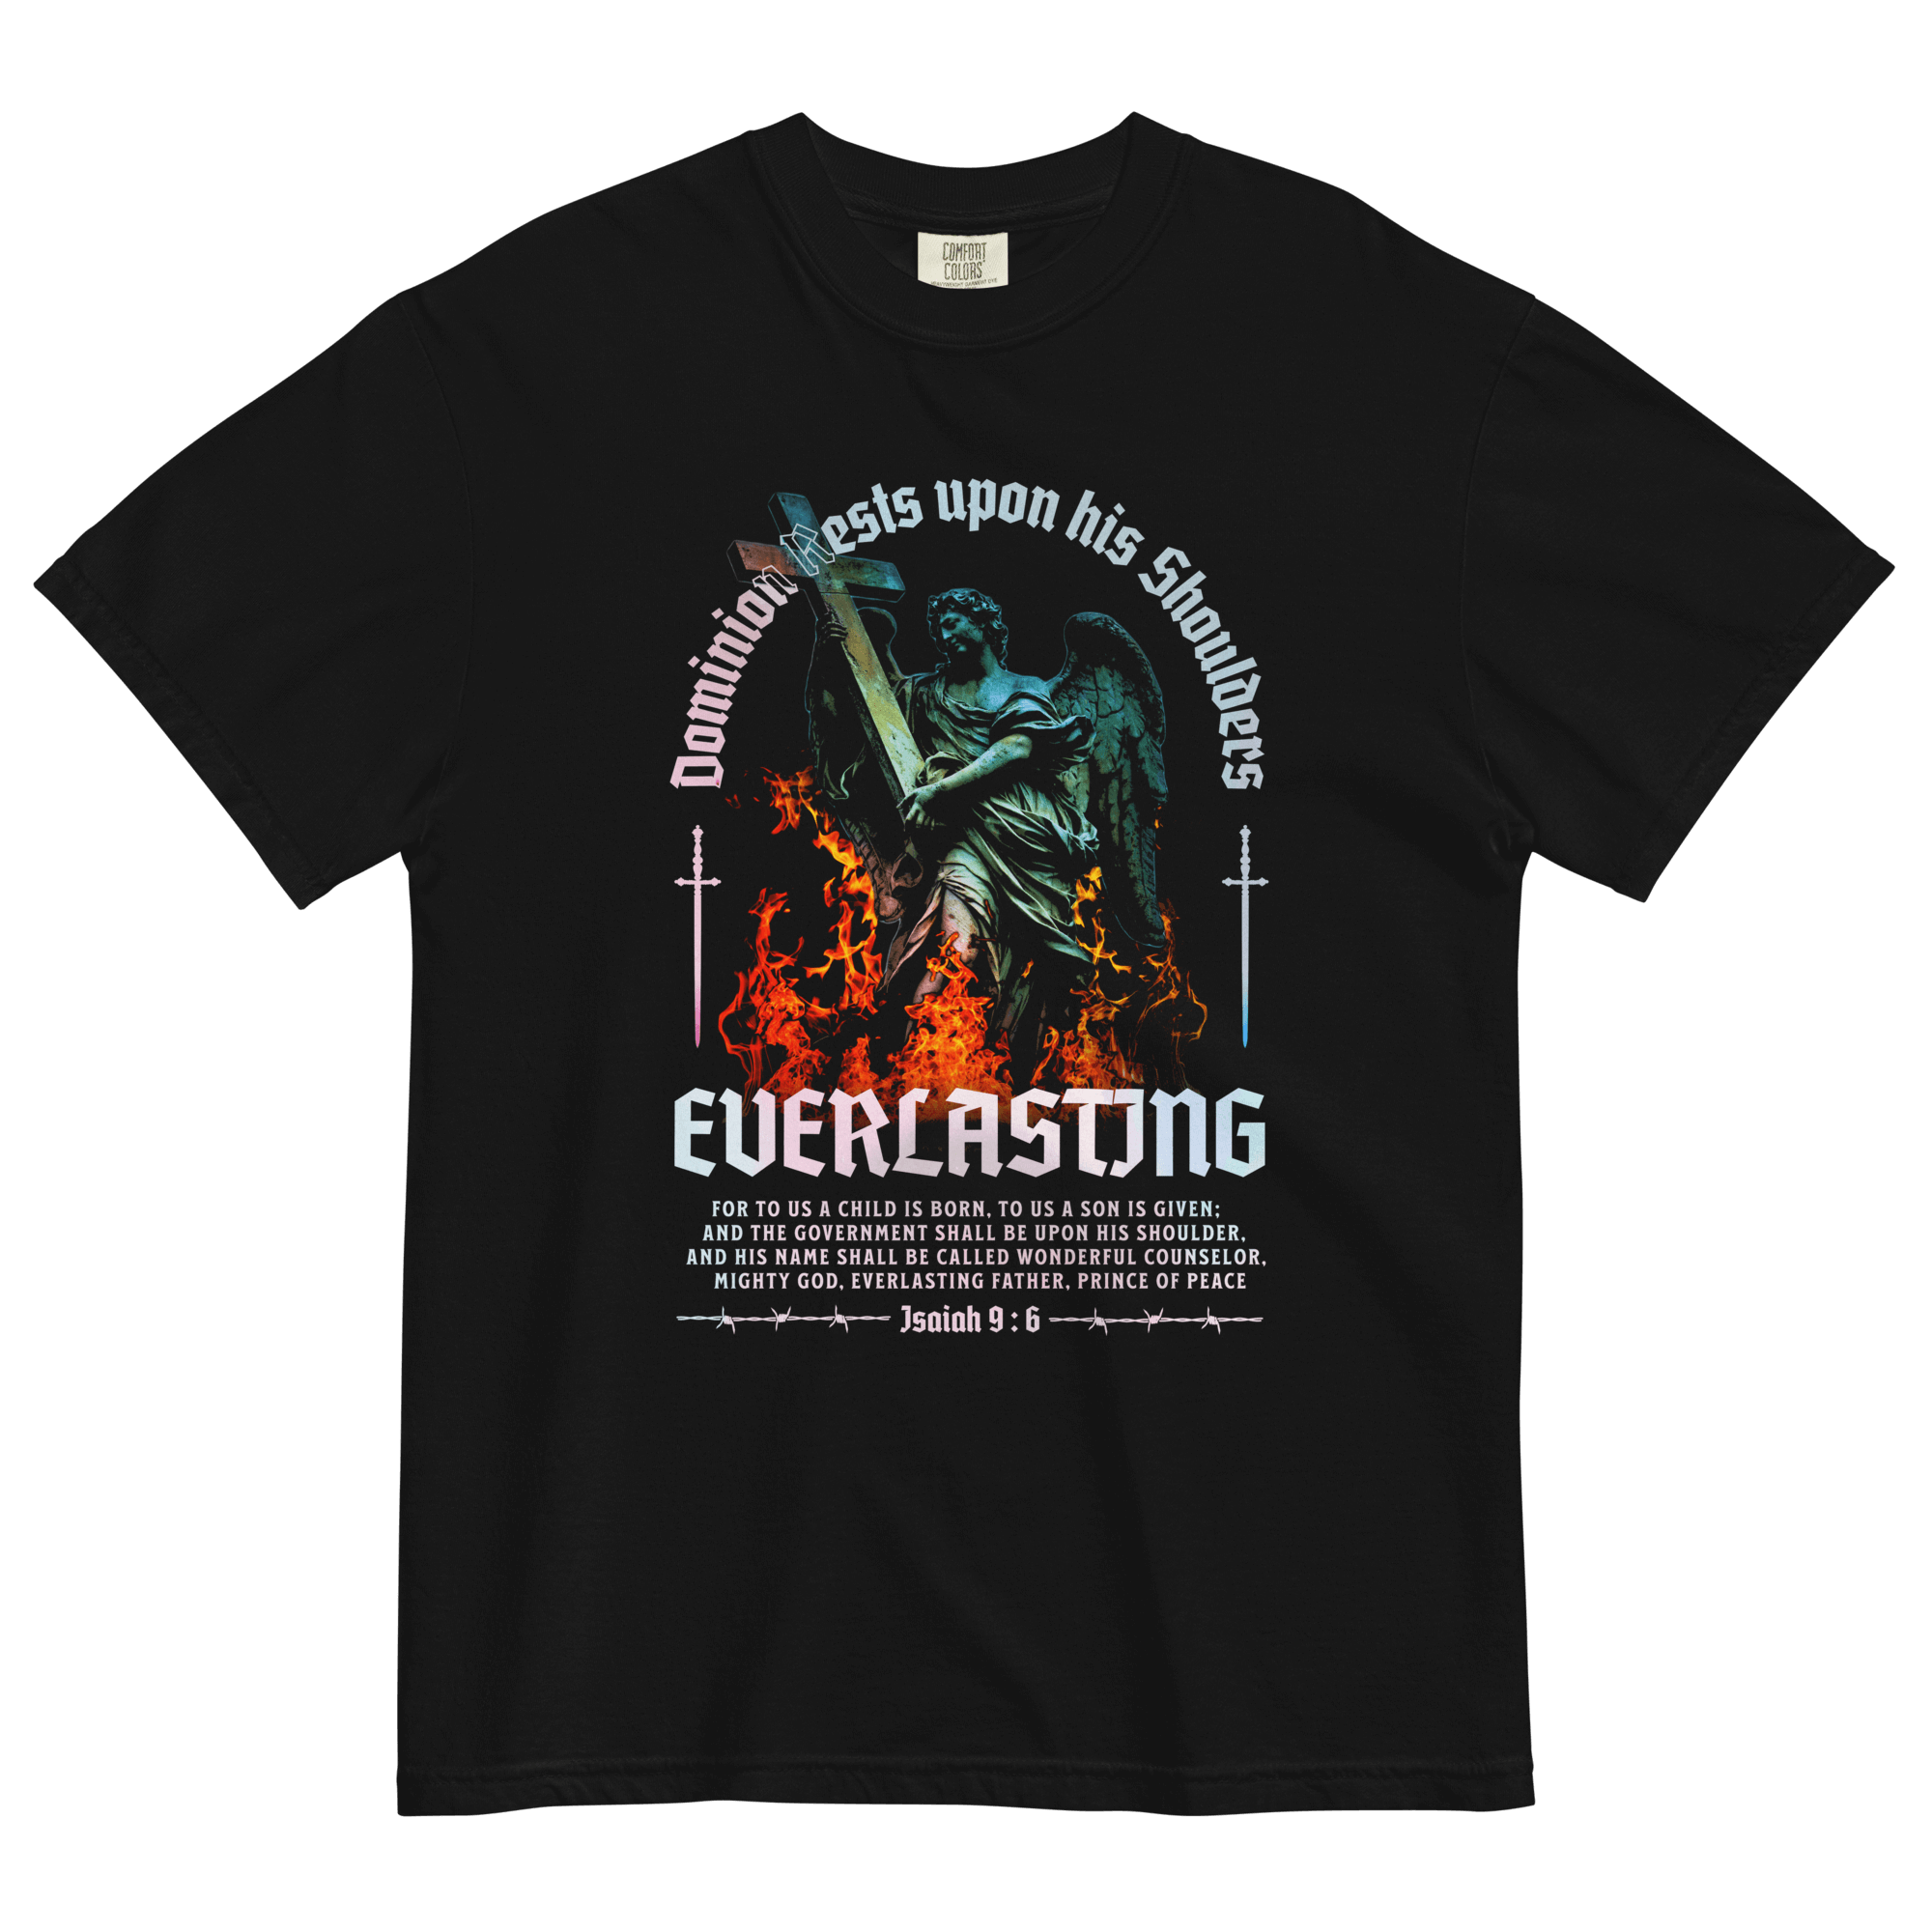 Everlasting T-shirtSnag our Everlasting T-shirt! Soft 100% cotton, relaxed Y2K vibe, durable design. Your ultimate tee for a timeless layered look. Shop now! • 100% ring-spun cotton • Fabric weight: 6.1 oz/yd² (206.8 g/m²) • Garment-dyed • Relaxed fit • 7